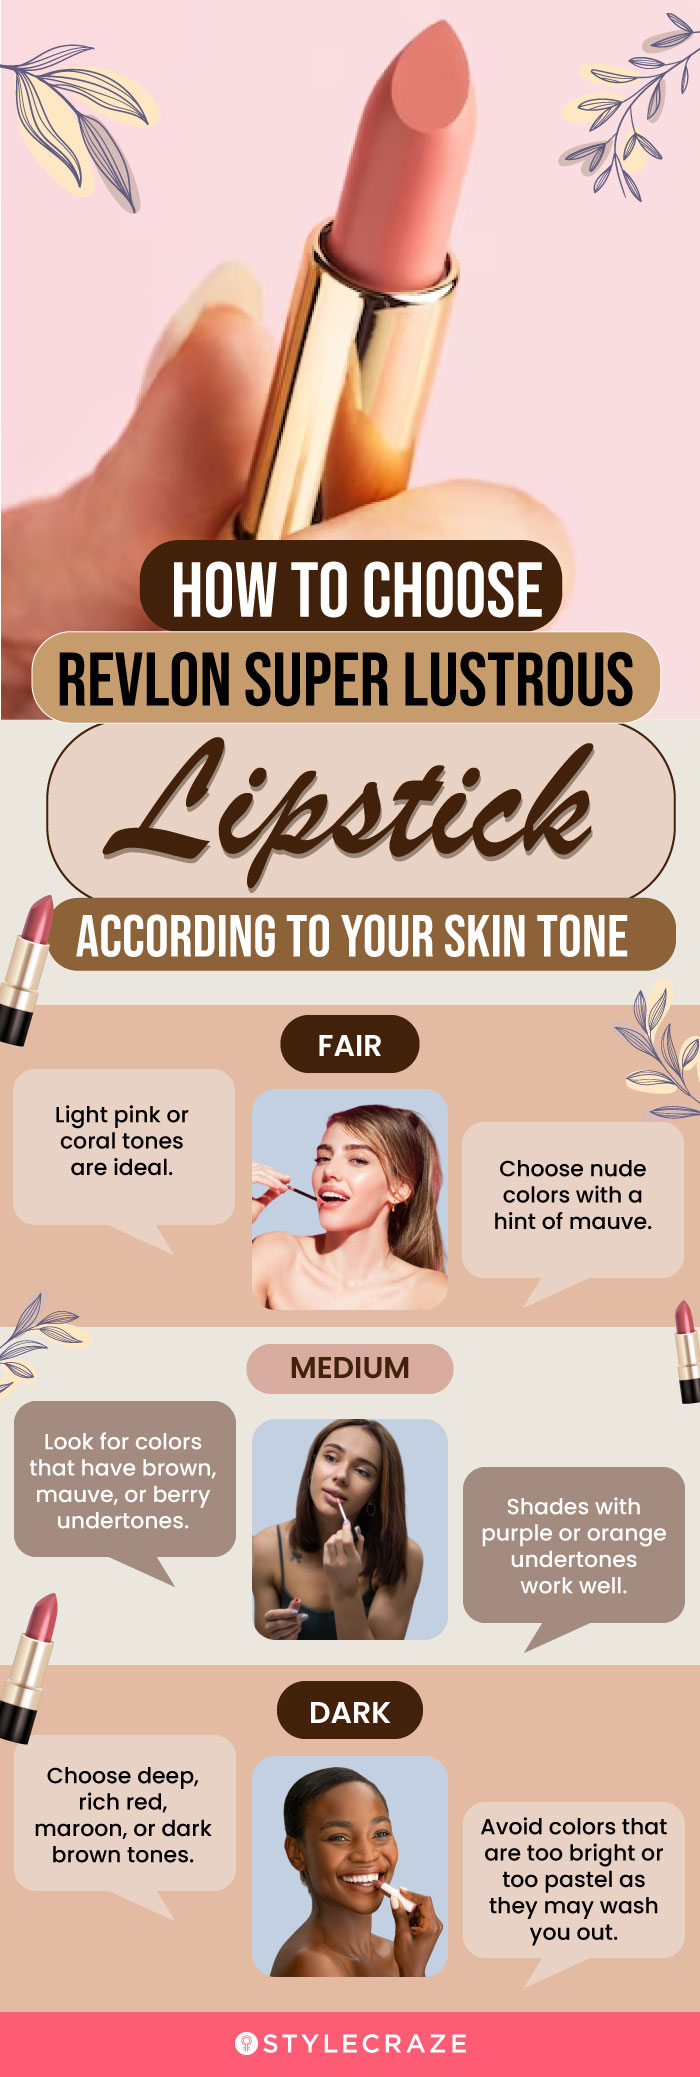 How To Choose Revlon Super Lustrous Lipstick According To Your Skin Tone (infographic)